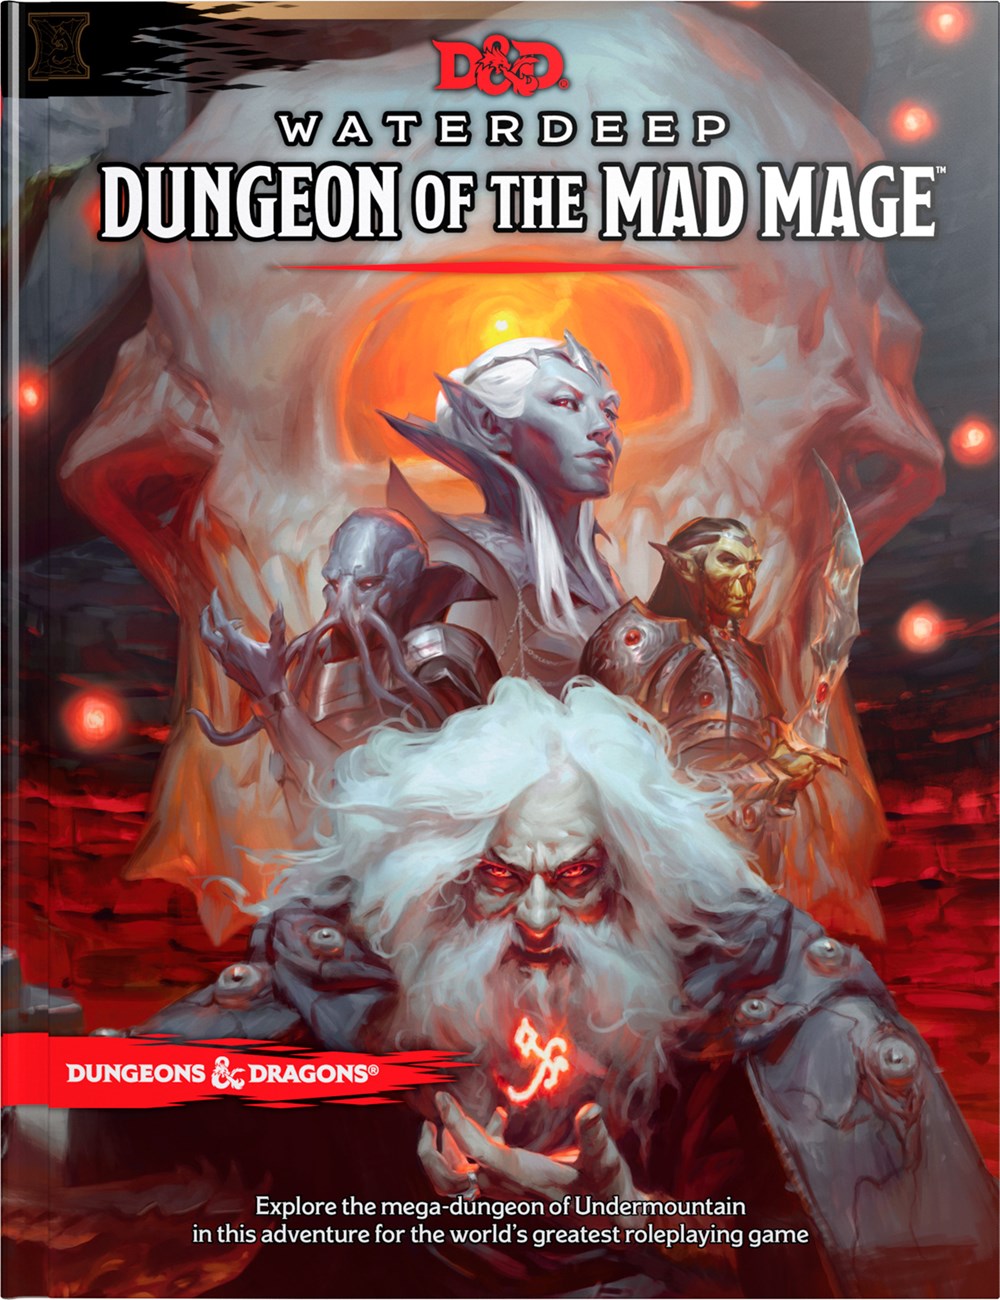 D&D: Waterdeep: Dungeon of the Mad Mage